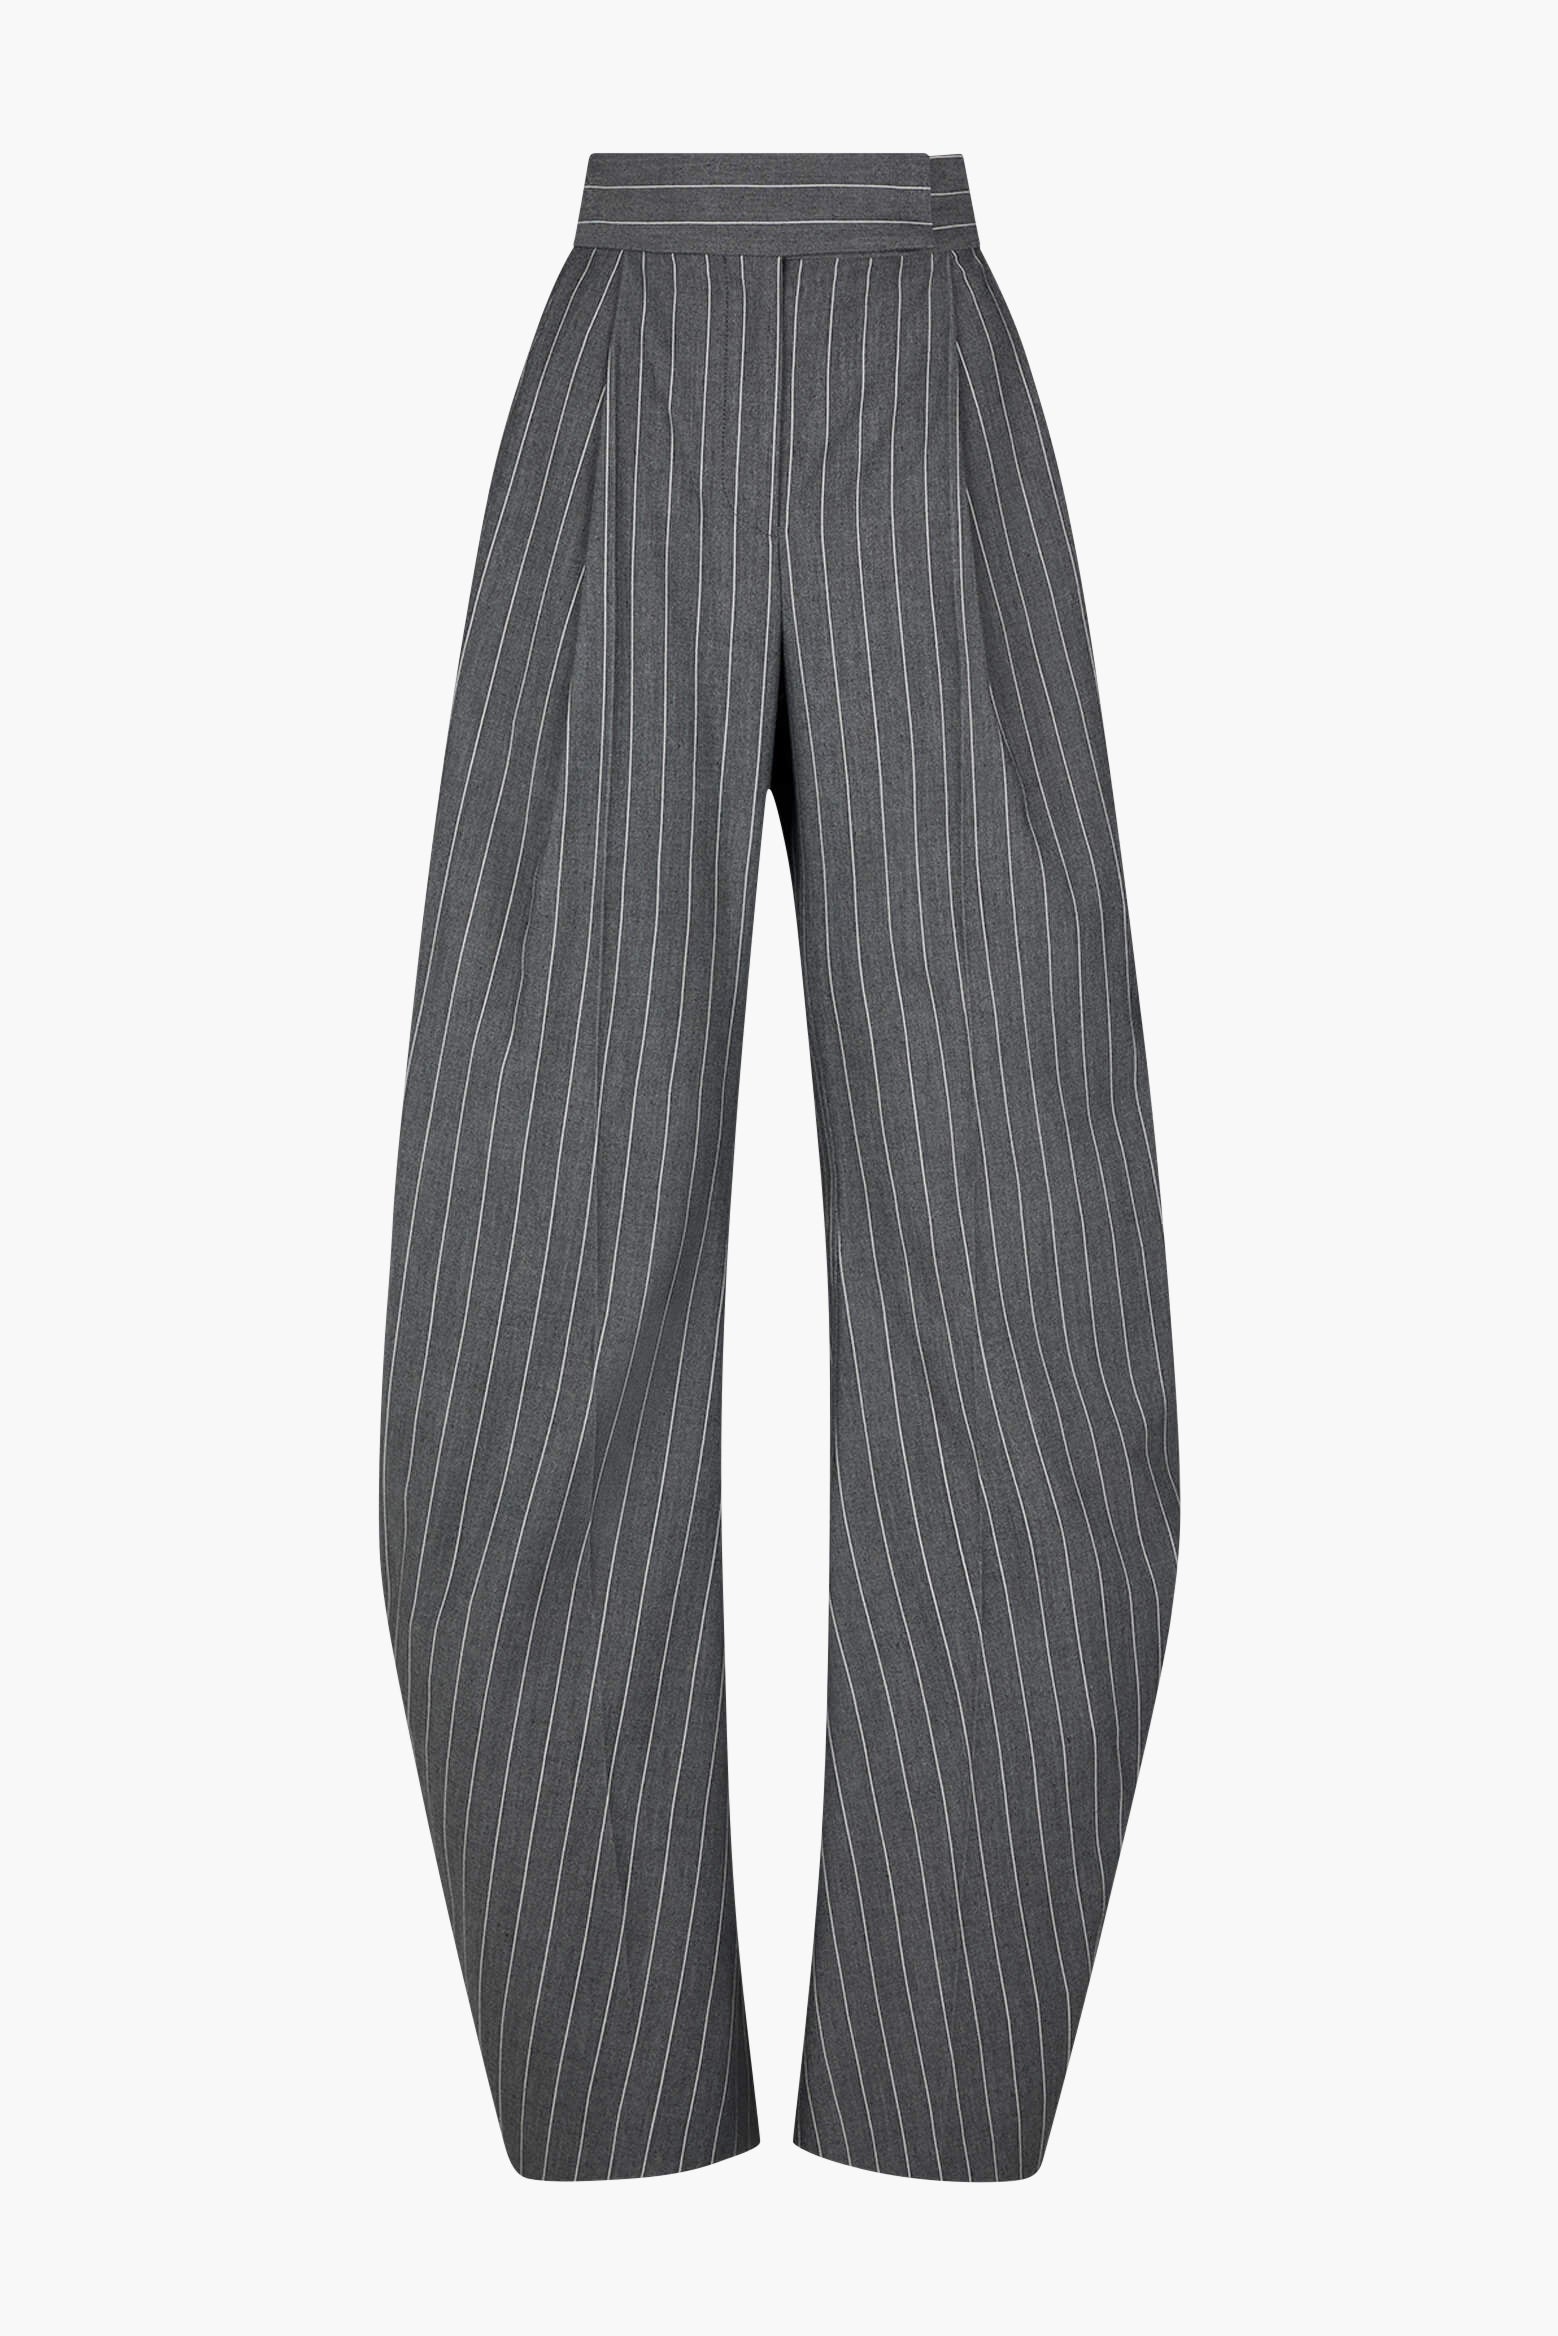 The Attico Gary Long Pants in Grey White Pinstripe available at The New Trend